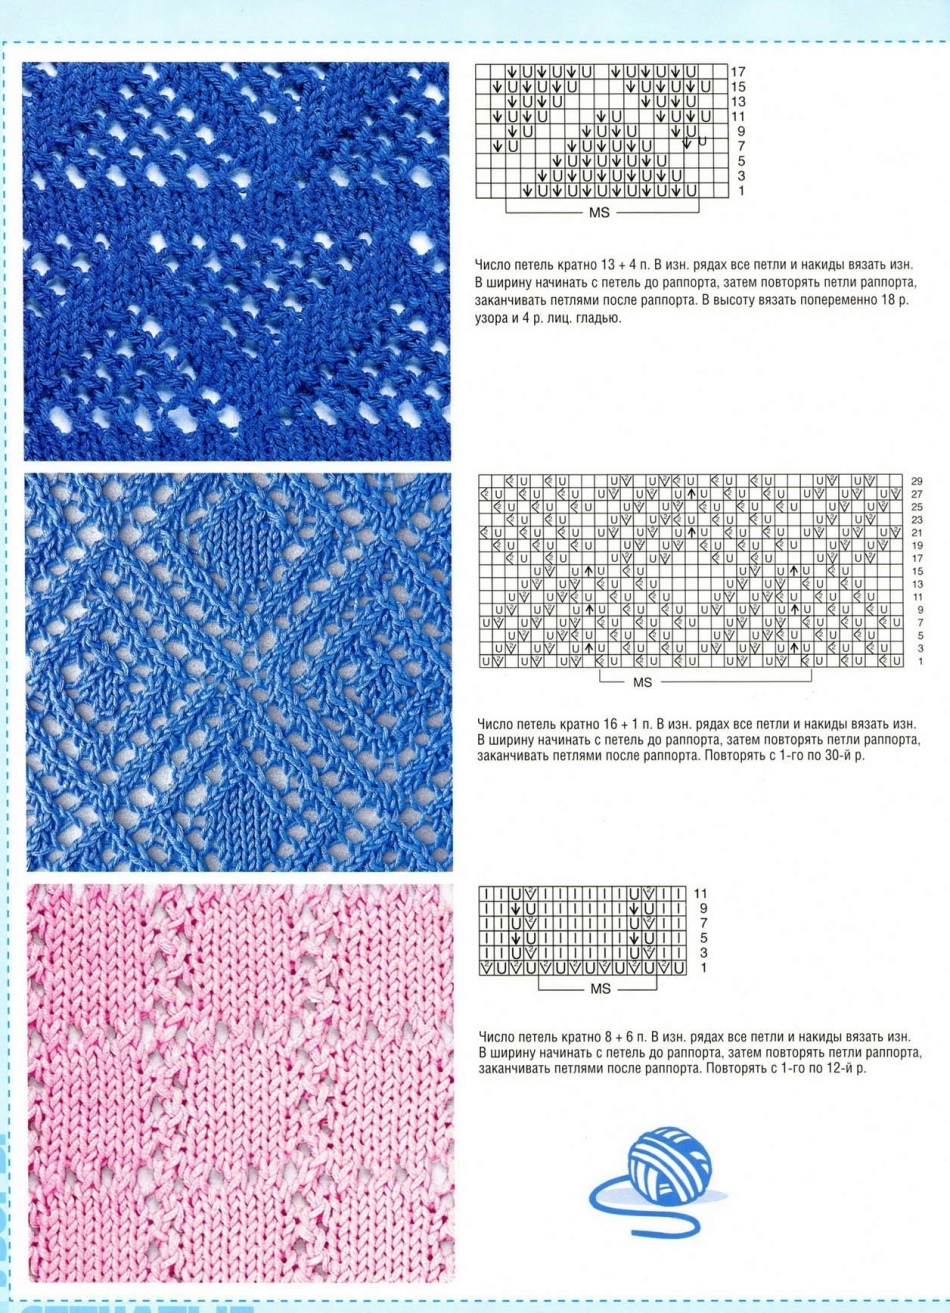 Openwork patterns and schemes for them for knitting gloves with knitting needles, example 3